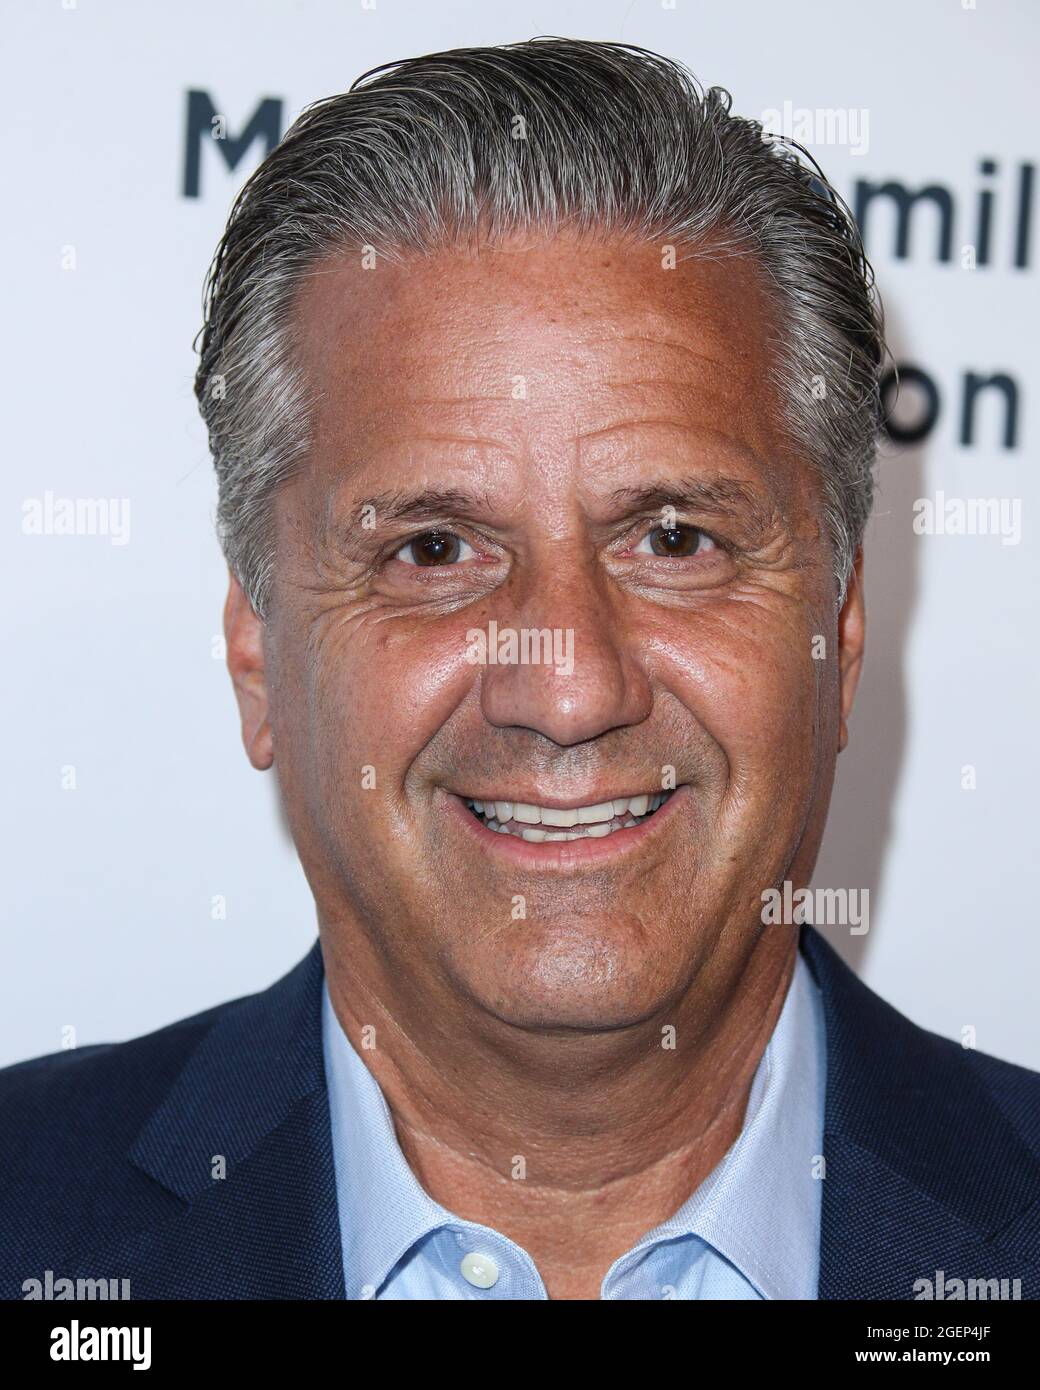 Beverly Hills, United States. 20th Aug, 2021. BEVERLY HILLS, LOS ANGELES, CALIFORNIA, USA - AUGUST 20: American basketball coach John Calipari arrives at the 21st Annual Harold and Carole Pump Foundation Gala held at The Beverly Hilton Hotel on August 20, 2021 in Beverly Hills, Los Angeles, California, United States. (Photo by Xavier Collin/Image Press Agency/Sipa USA) Credit: Sipa USA/Alamy Live News Stock Photo